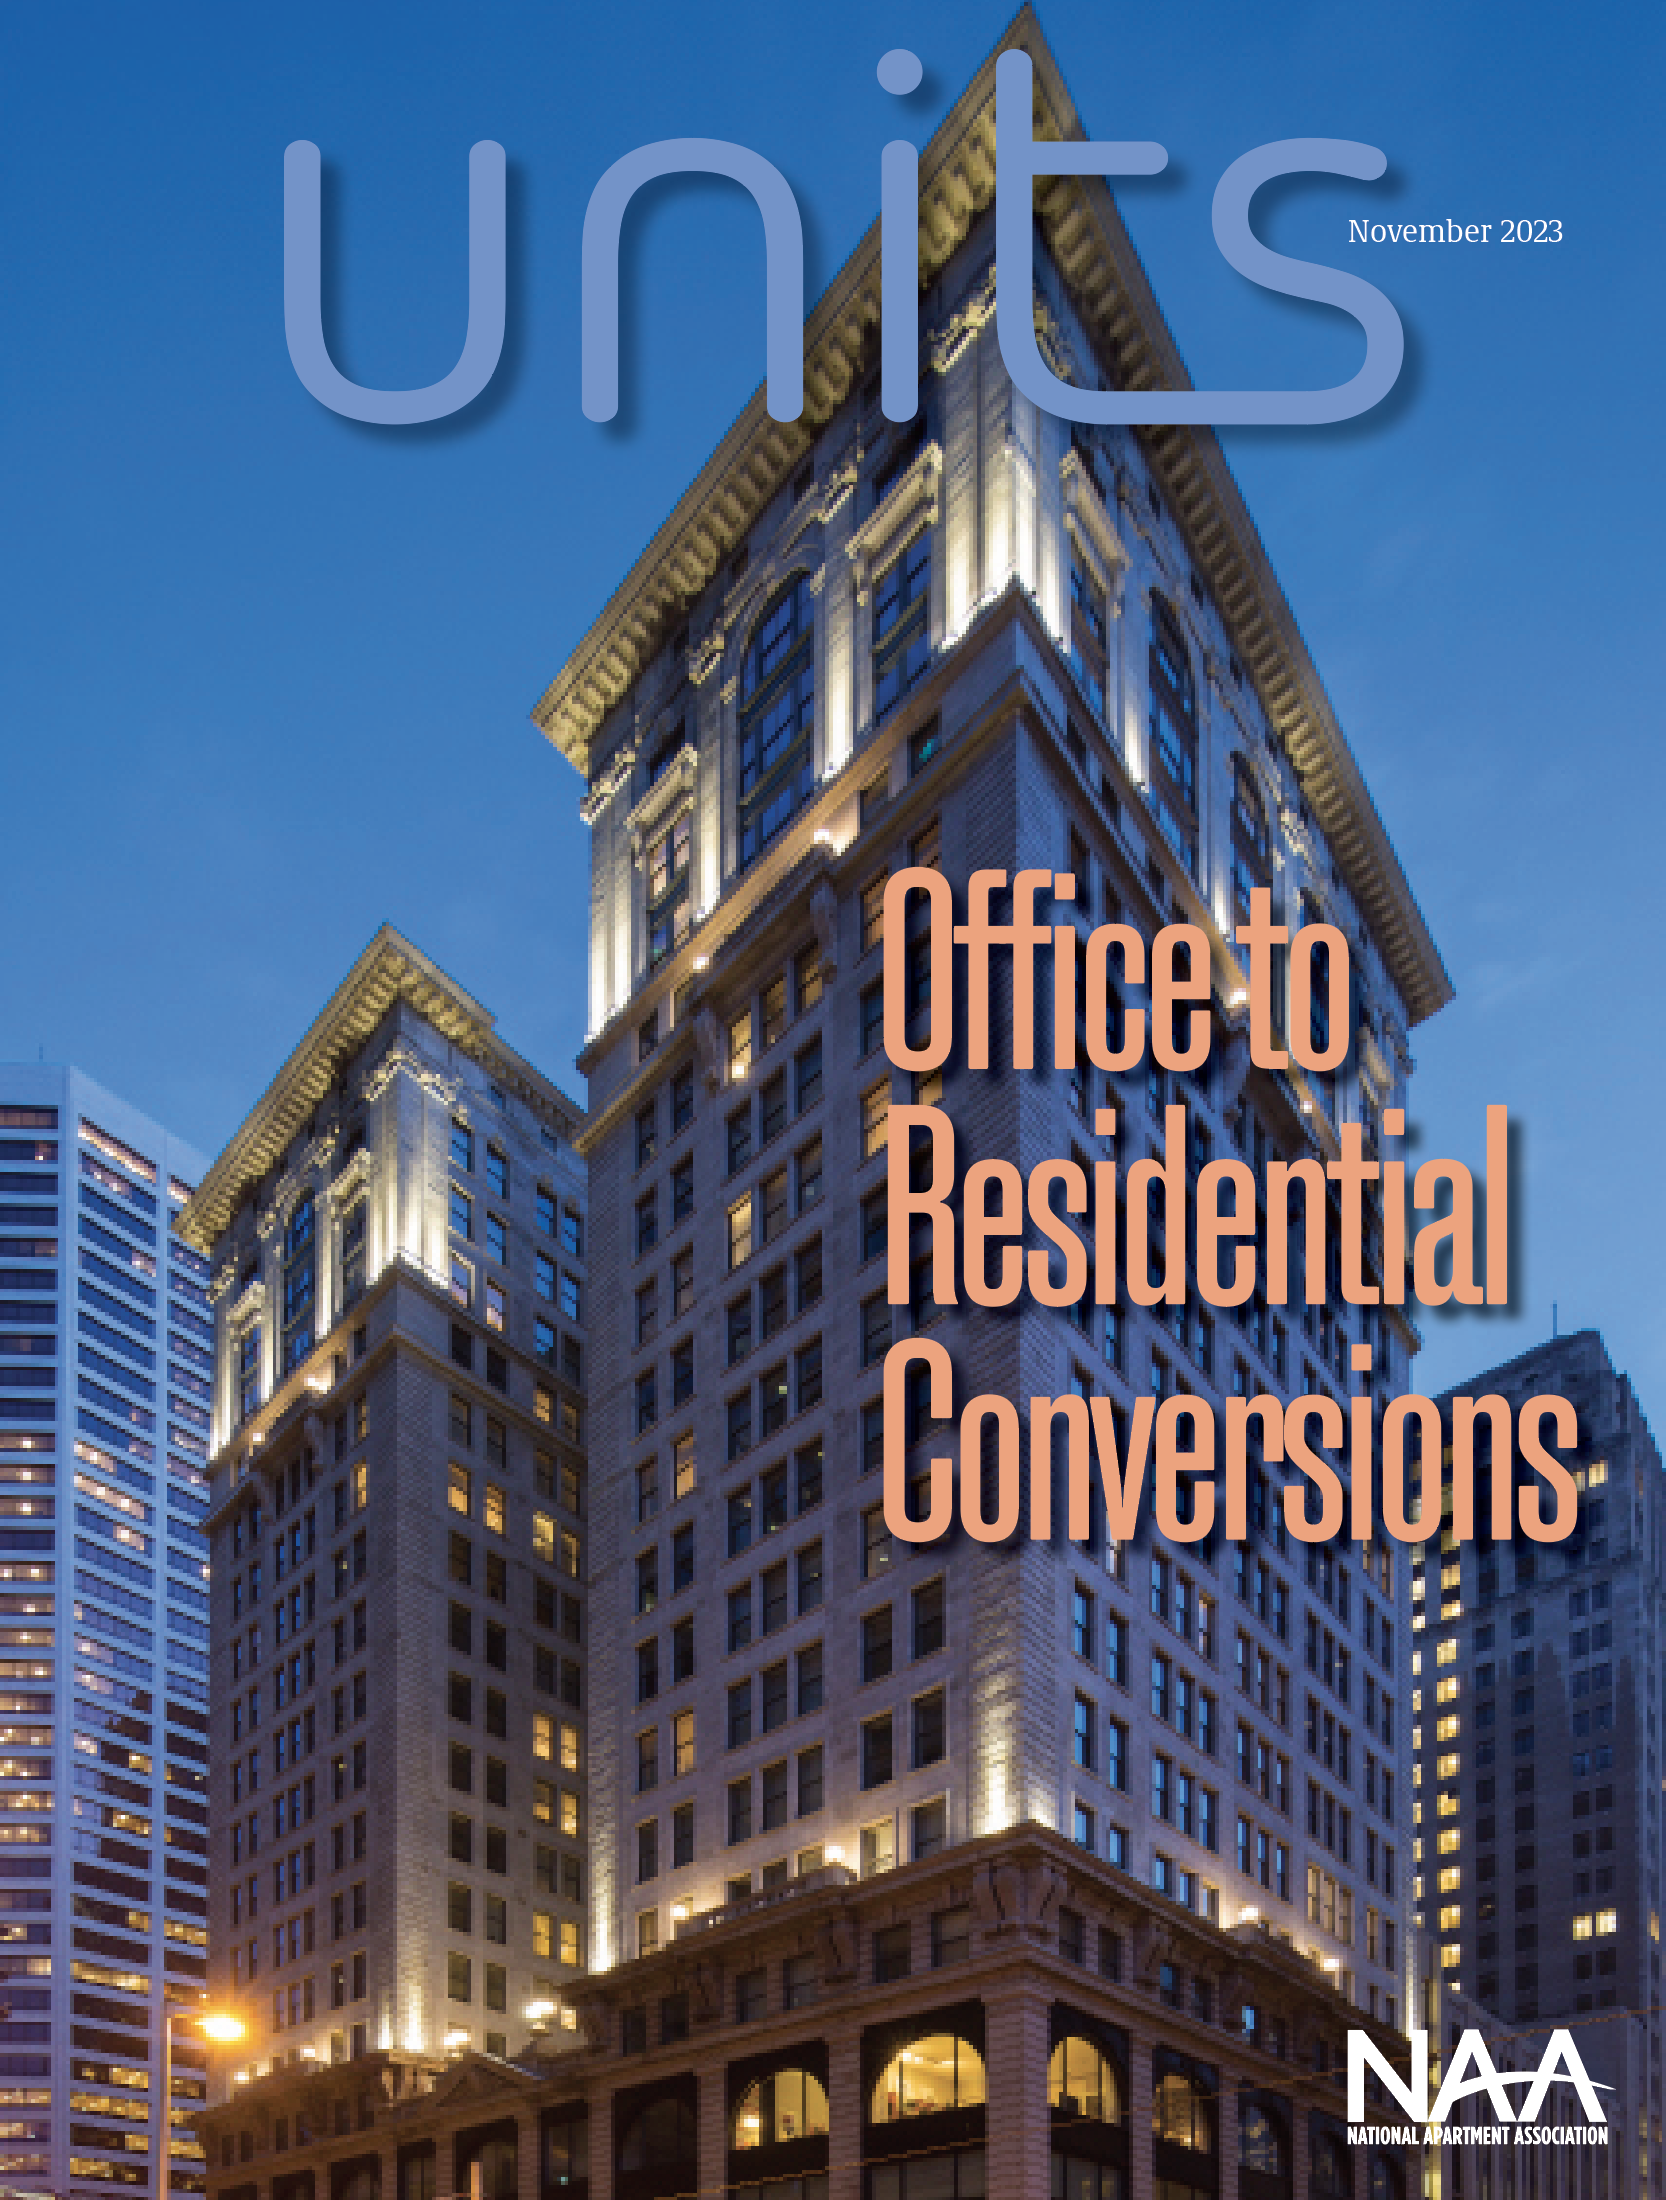 units magazine cover, november 2023: title "office to residential conversions"